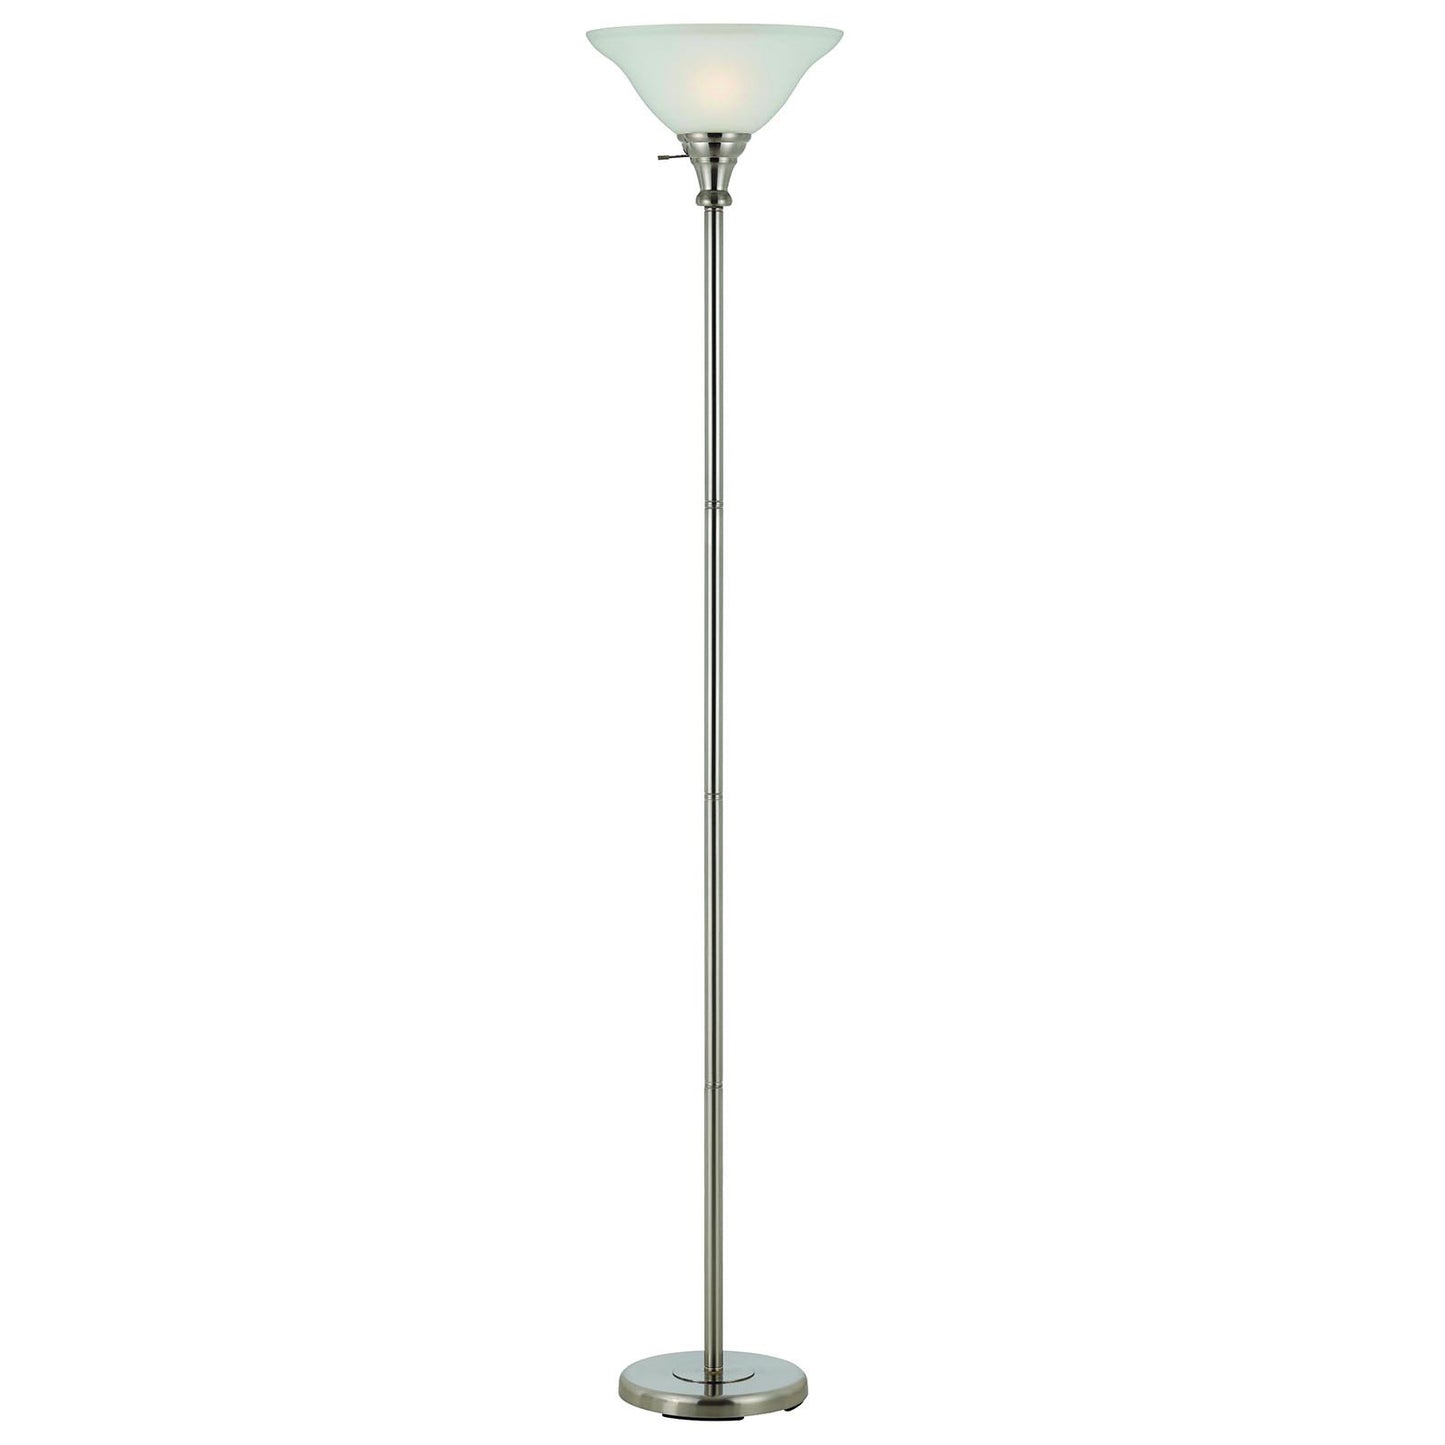 71" Nickel Torchiere Floor Lamp With Clear Frosted Glass Dome Shade